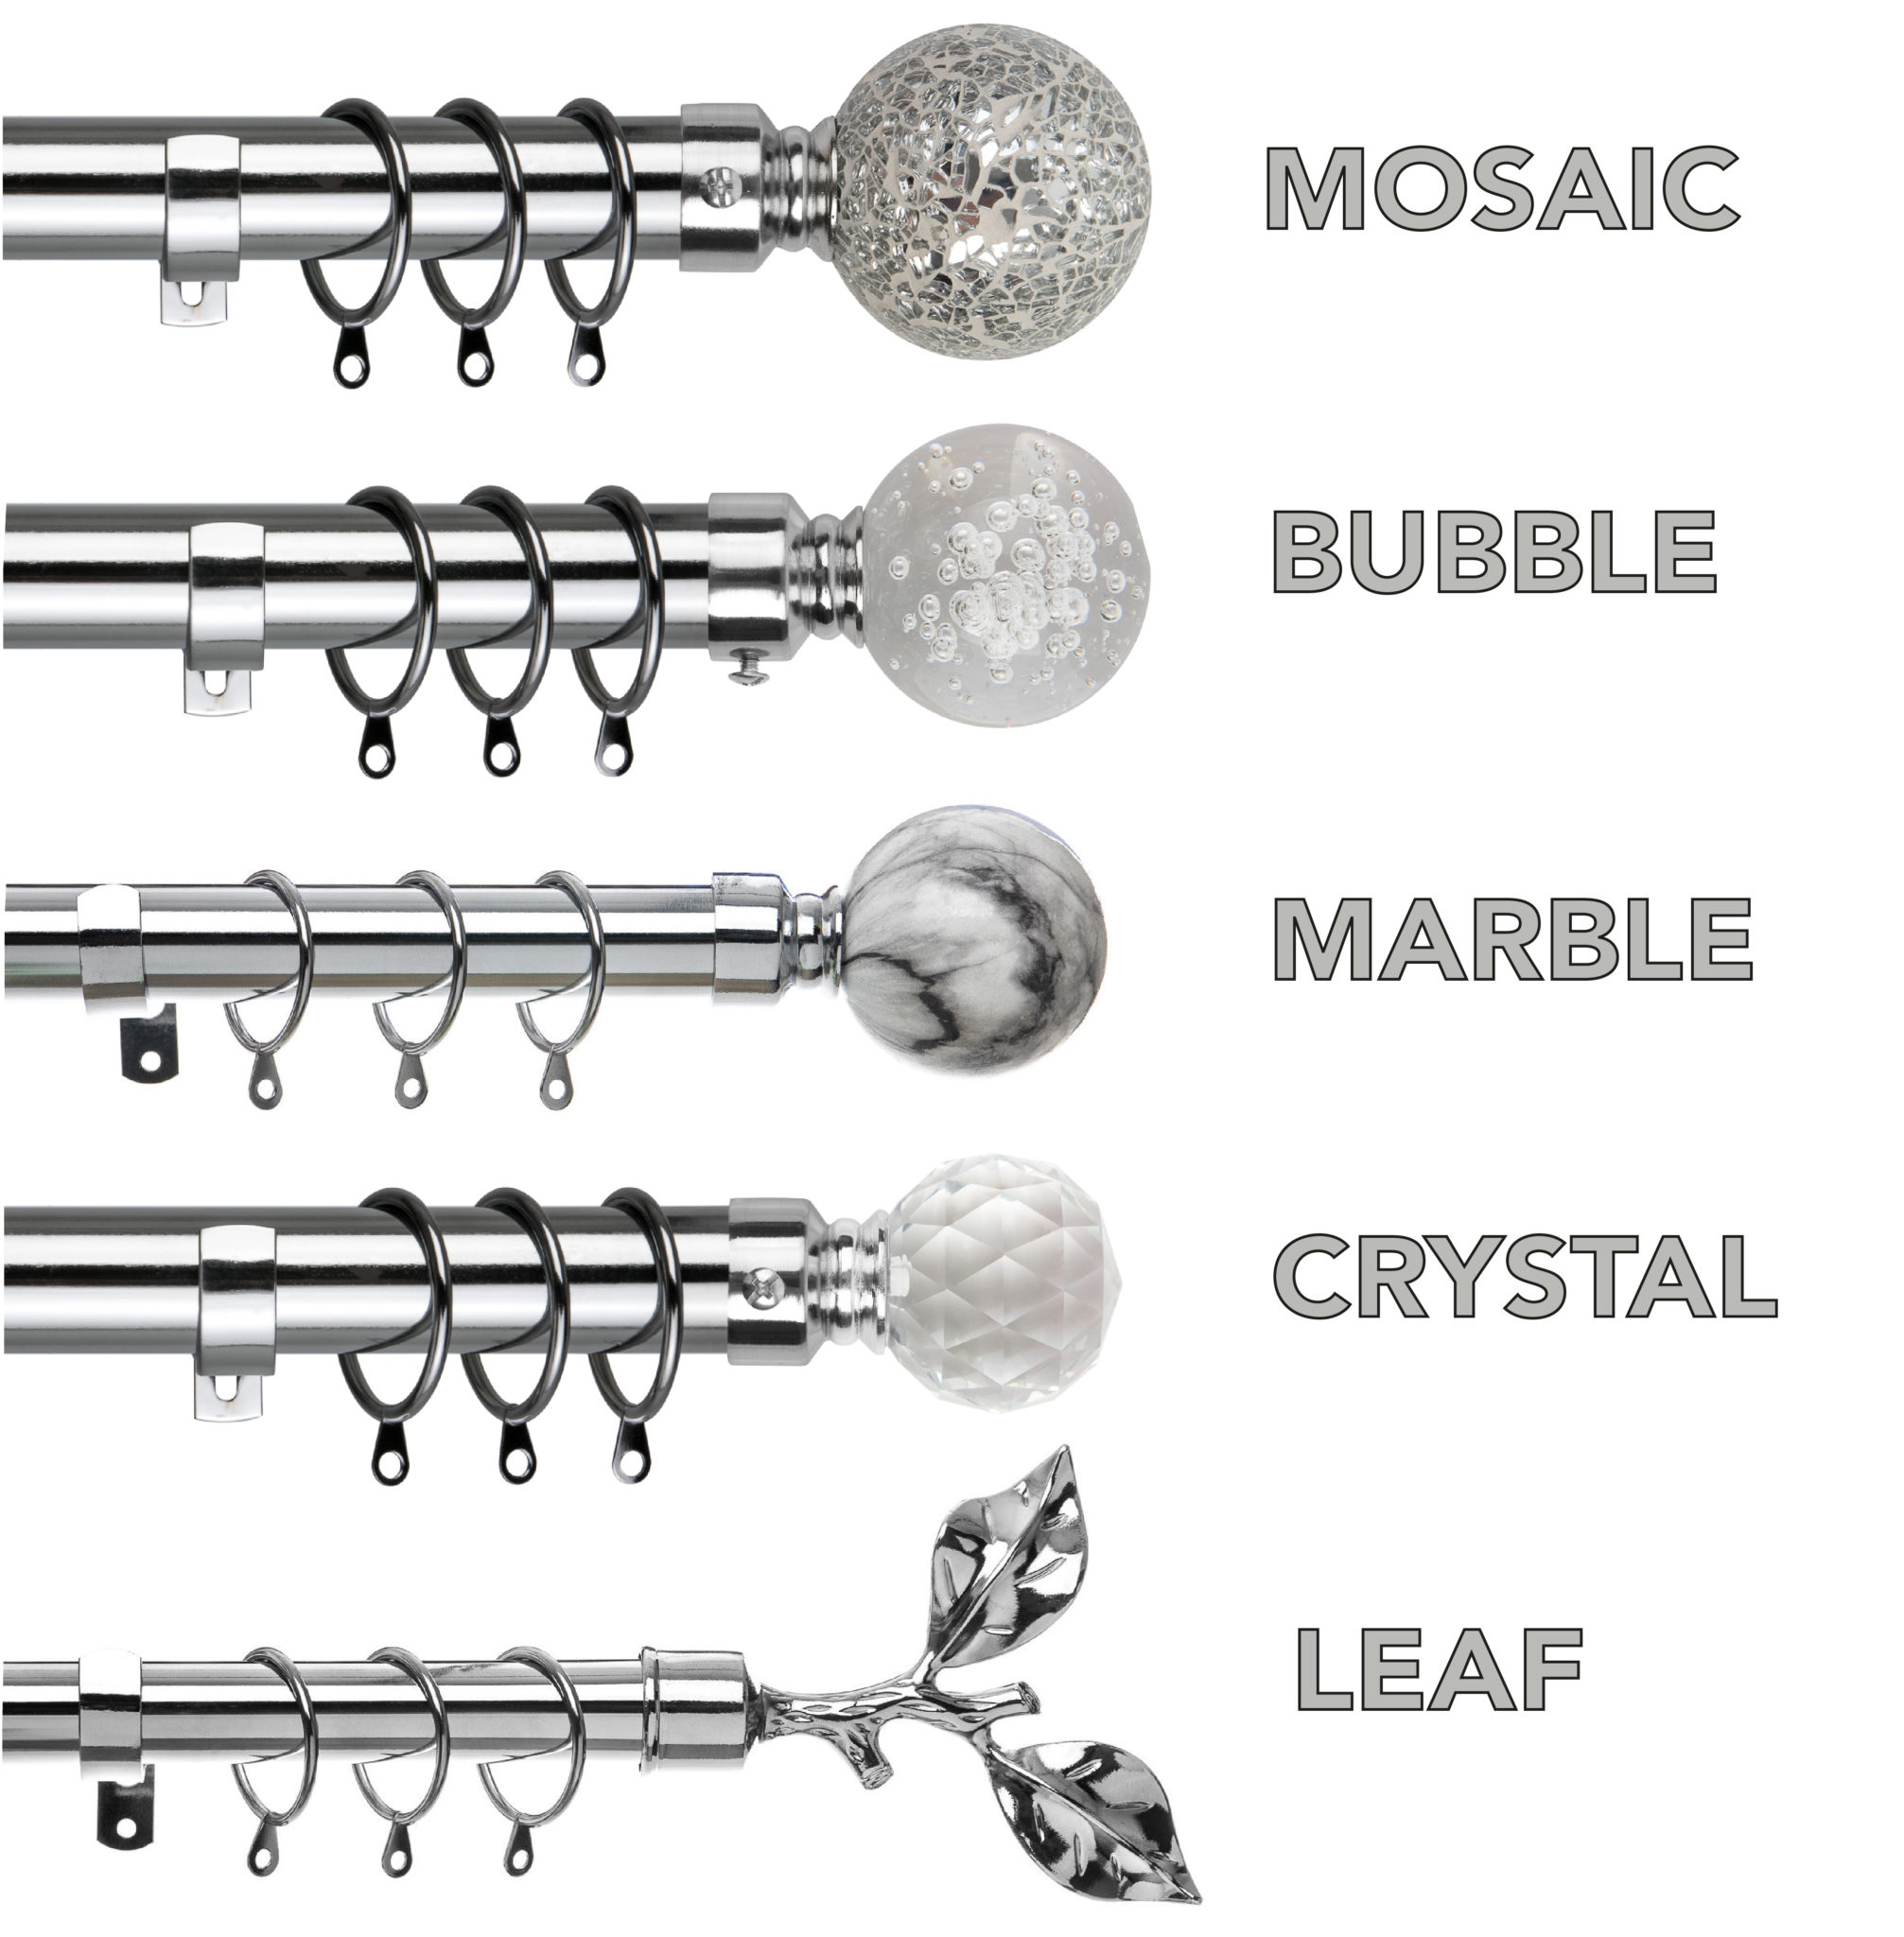 Mosaic Includes Rings & Fittings 28mm. Crystal Set of 2 tiebacks, Crystal Final Bubble Finals Chrome Extendable Curtain Pole